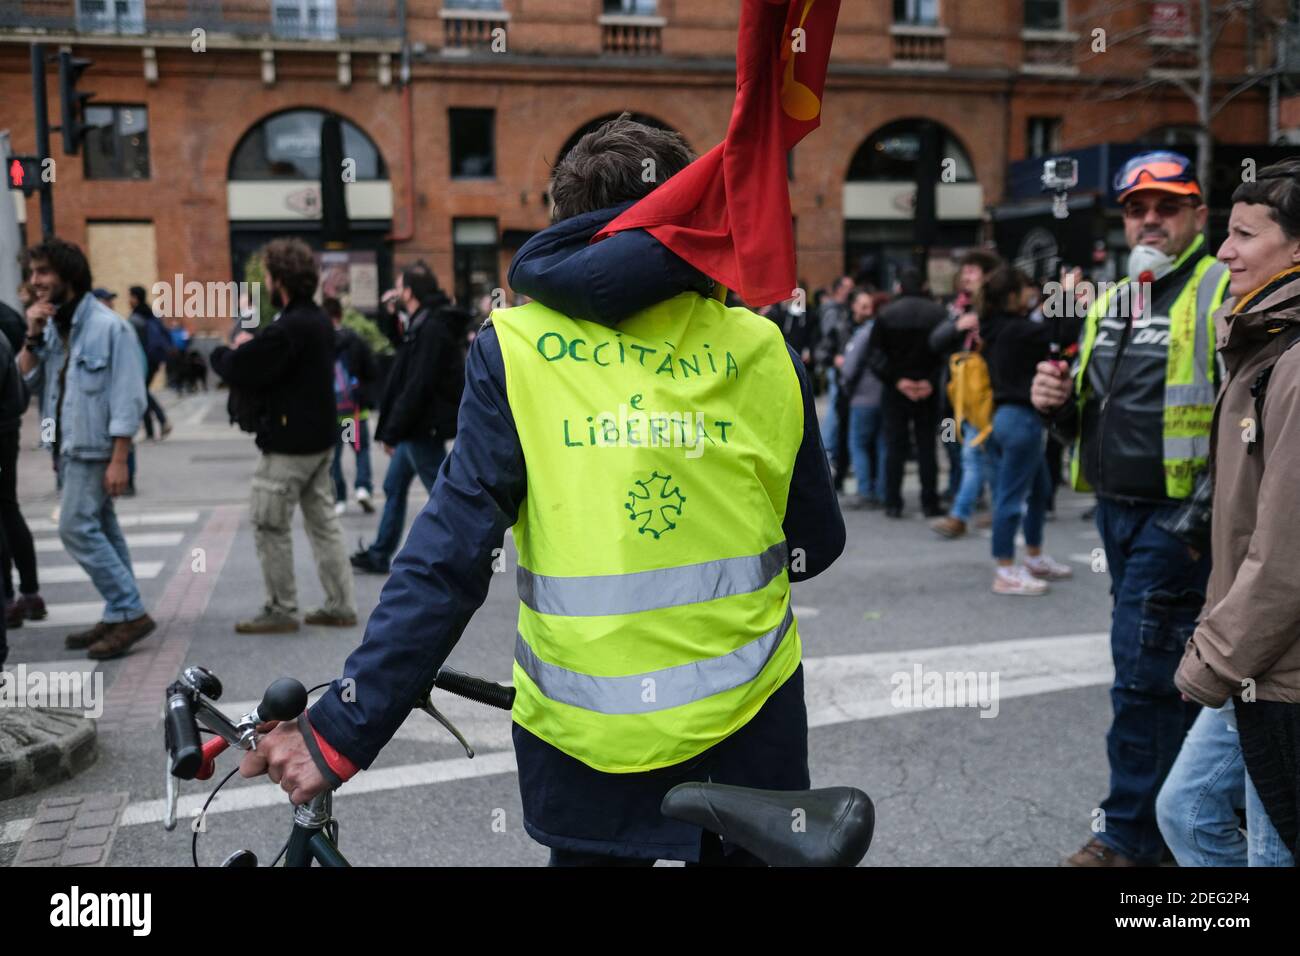 Protestor with occitan message on his yellow vest "Occitania and Freedom"  (Occitània e libertat). For the 24th consecutive Saturday, the Gilets Jaunes  (Yellow Vests) demonstrated in the streets of Toulouse (France), April